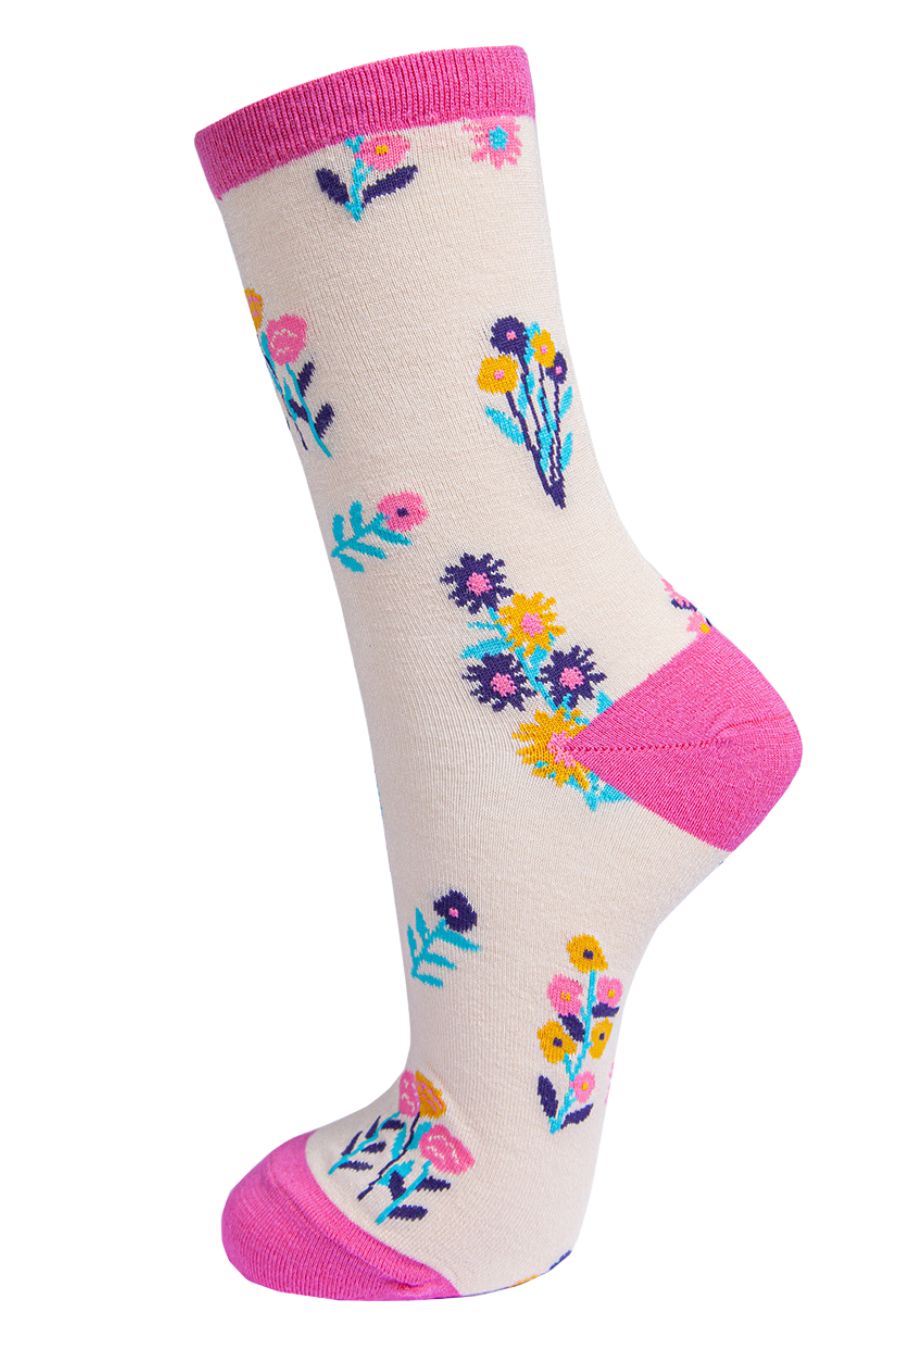 cream and pink ankle socks with a multicoloured ditsy floral print